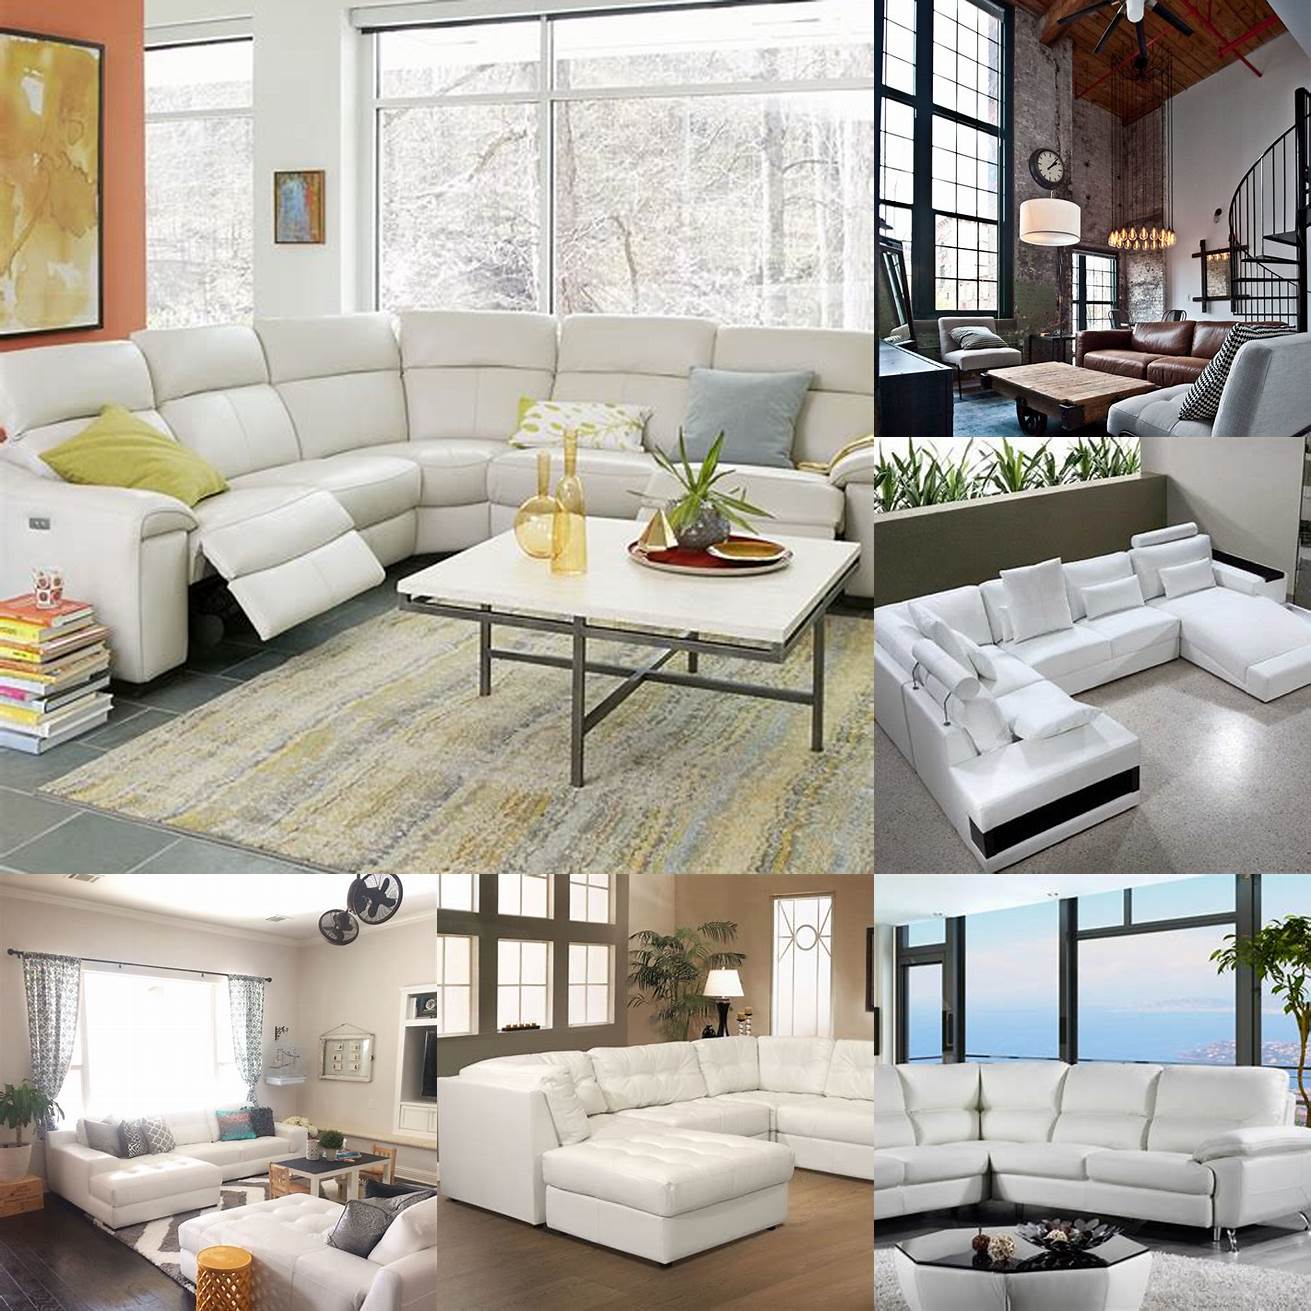 White leather sectional in an industrial living room